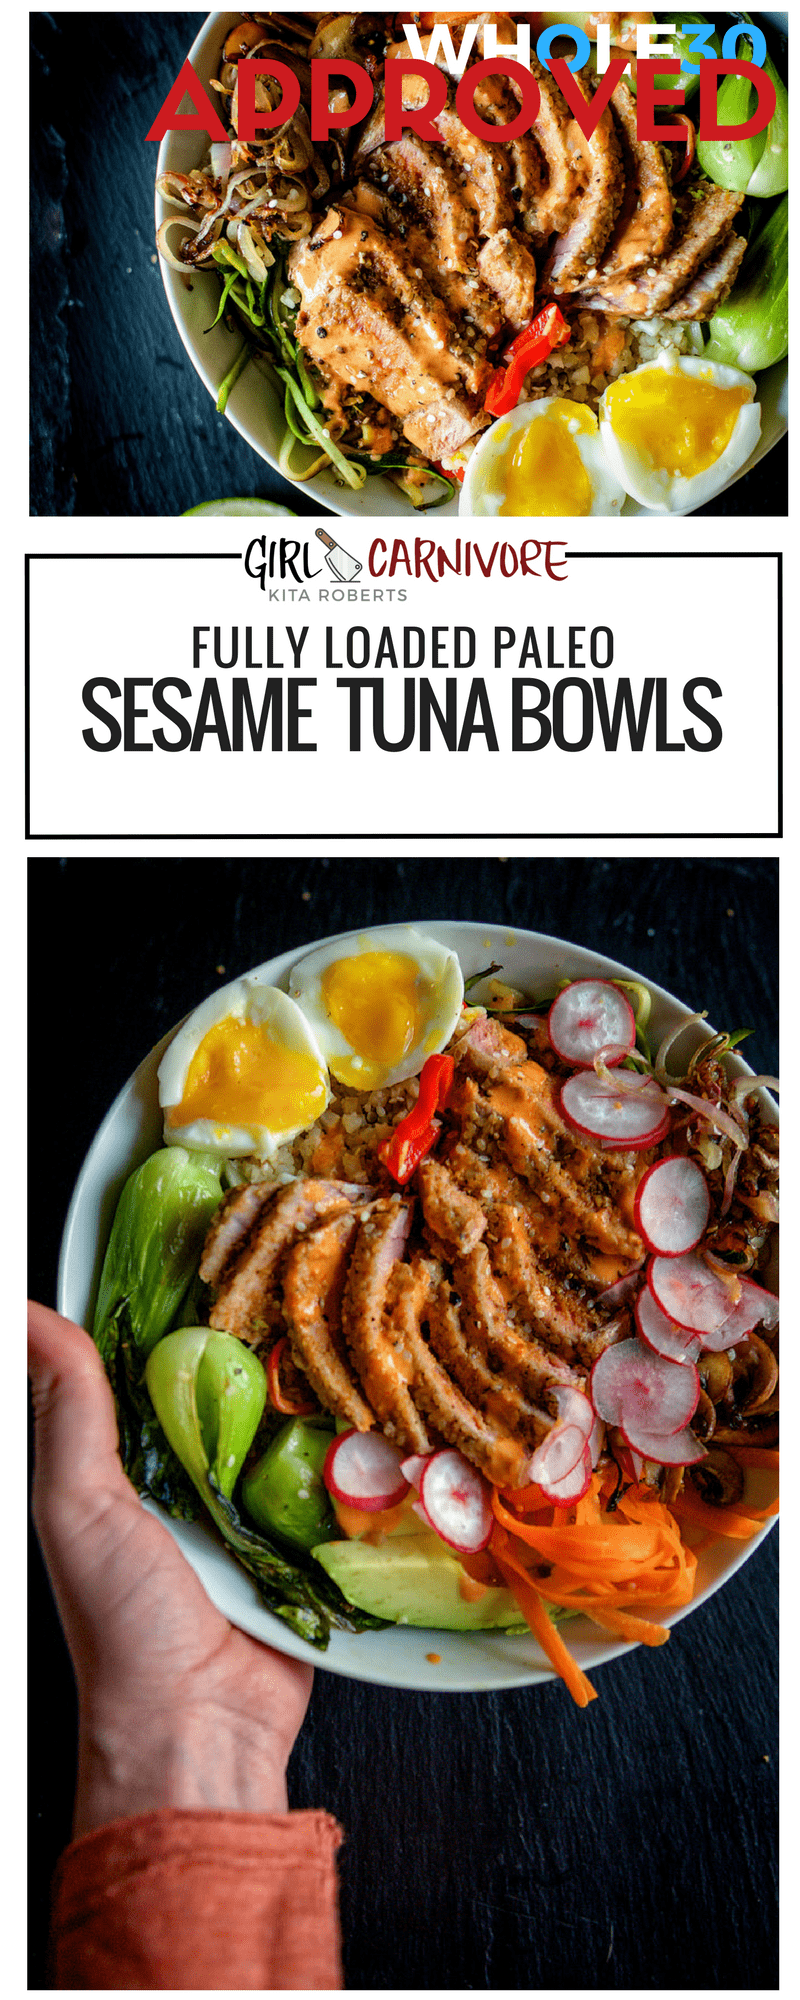 Fully Loaded Paleo Sesame Tuna Bowls - the perfect power meal from GirlCarnivore.com